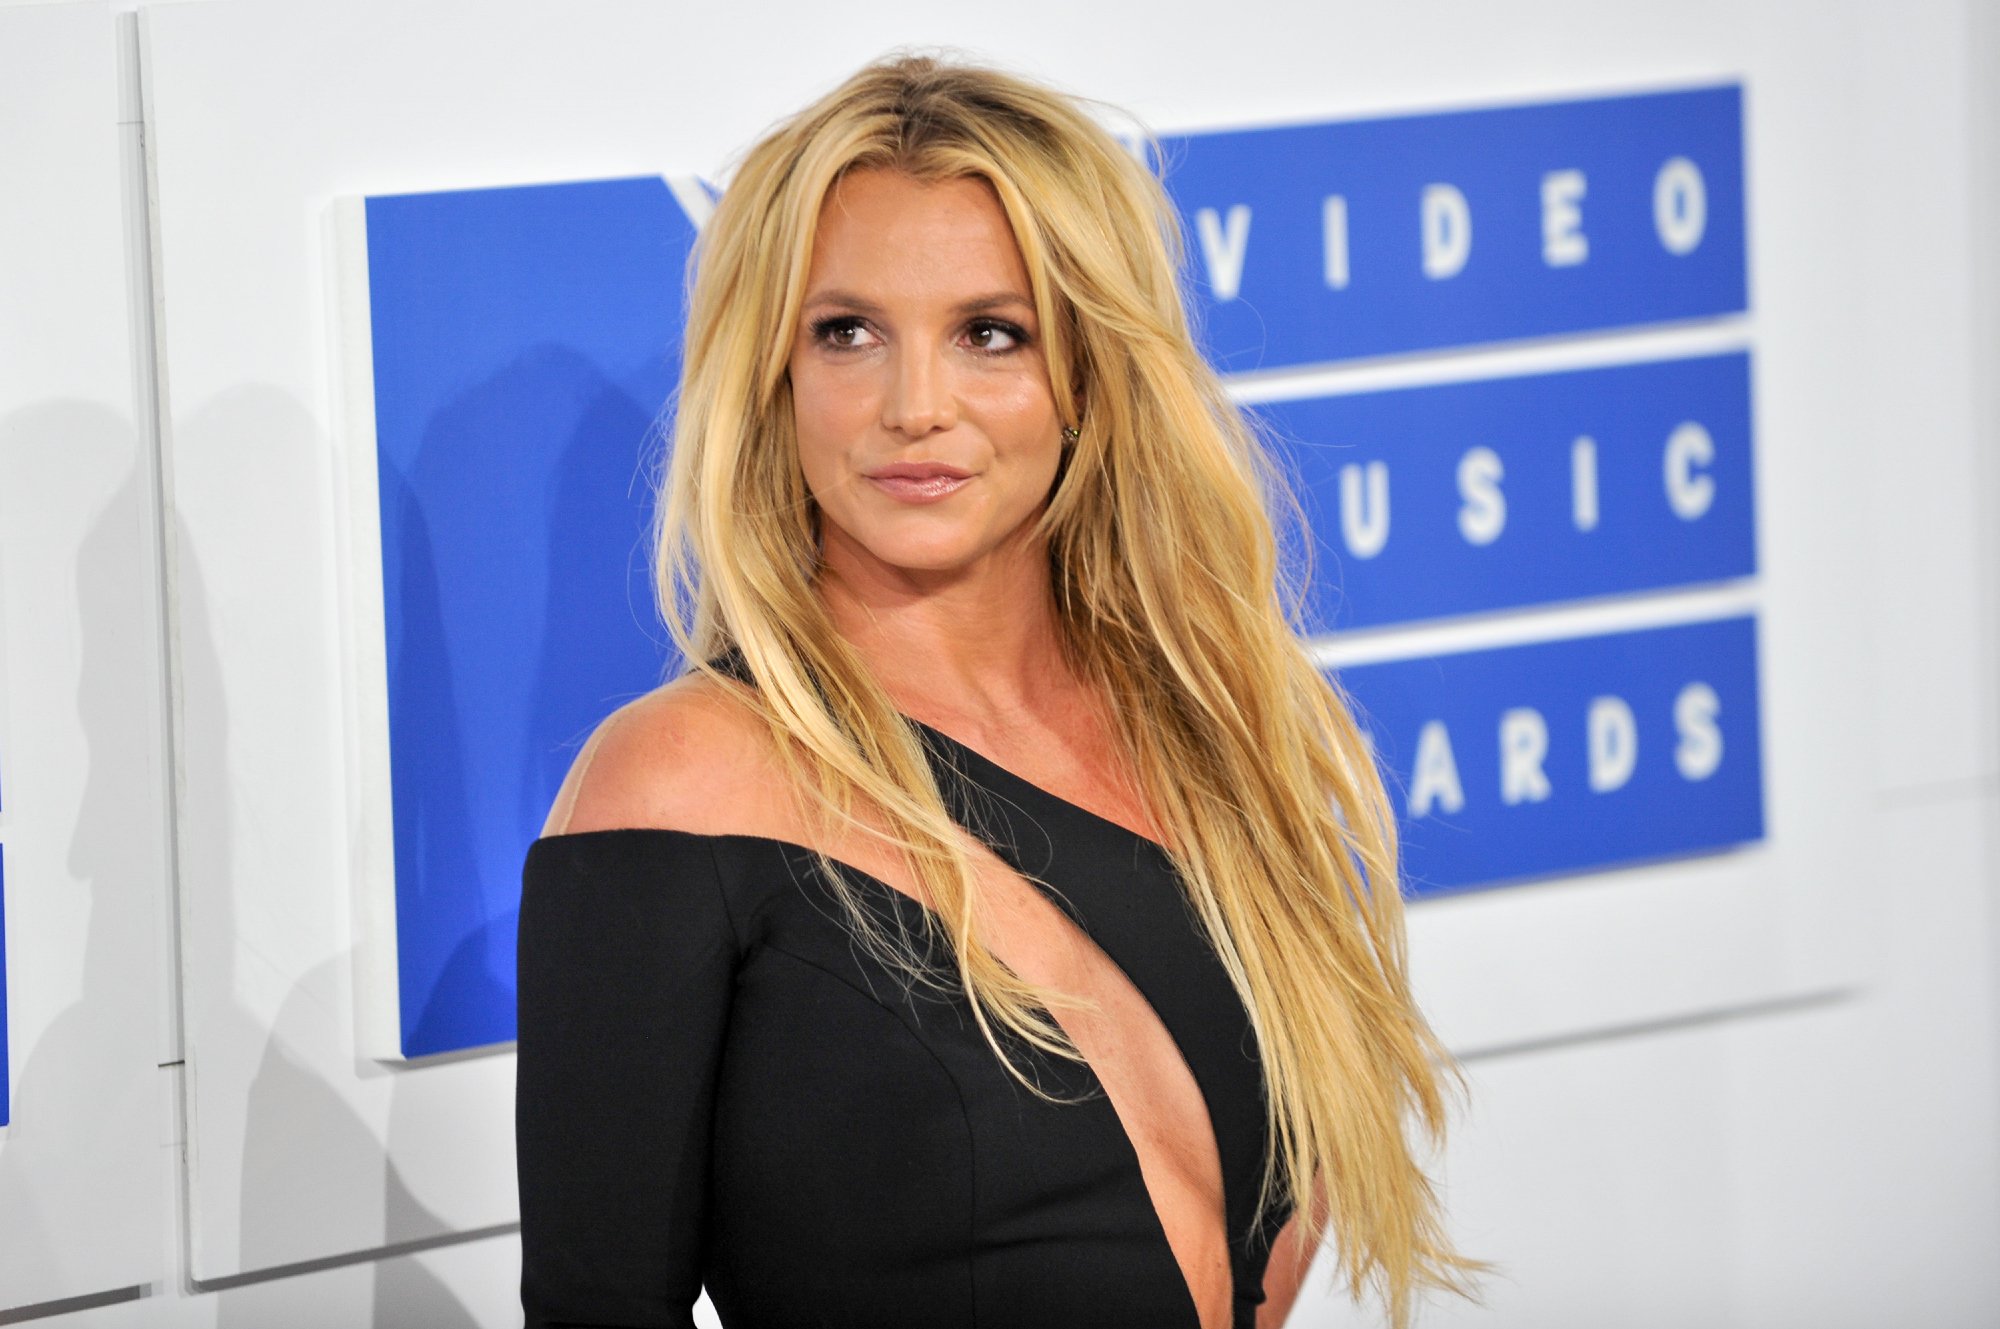 'Britney vs Spears' Netflix documentary subject Britney Spears at the 2016 MTV Video Music Awards wearing a black dress